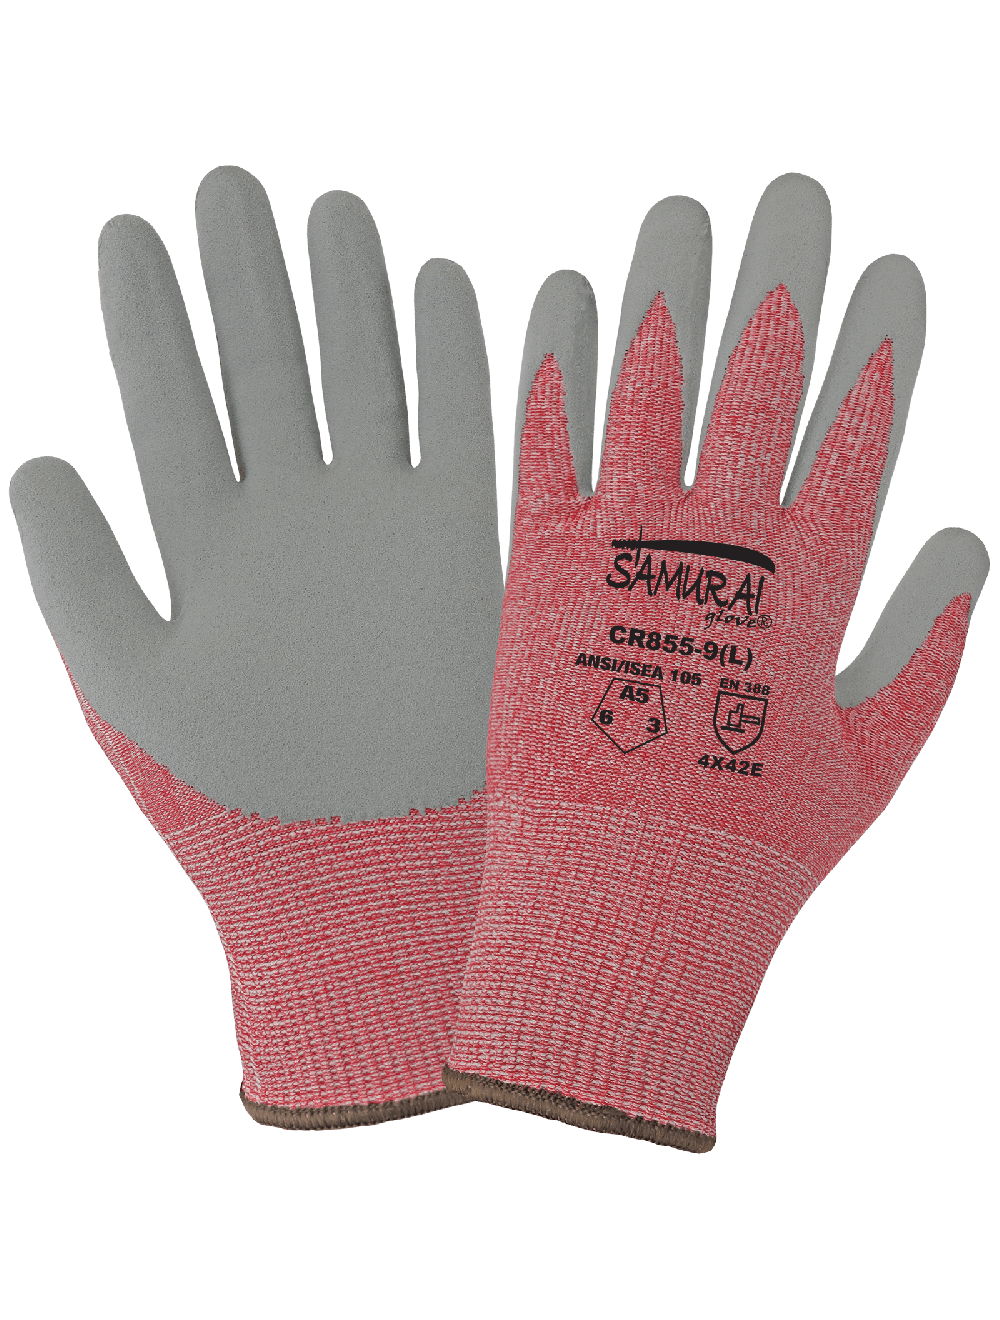 Samurai Glove® Tuffalene® UHMWPE Cut Resistant 13-Gauge Gloves with a Silicone-Coated Palm - CR855